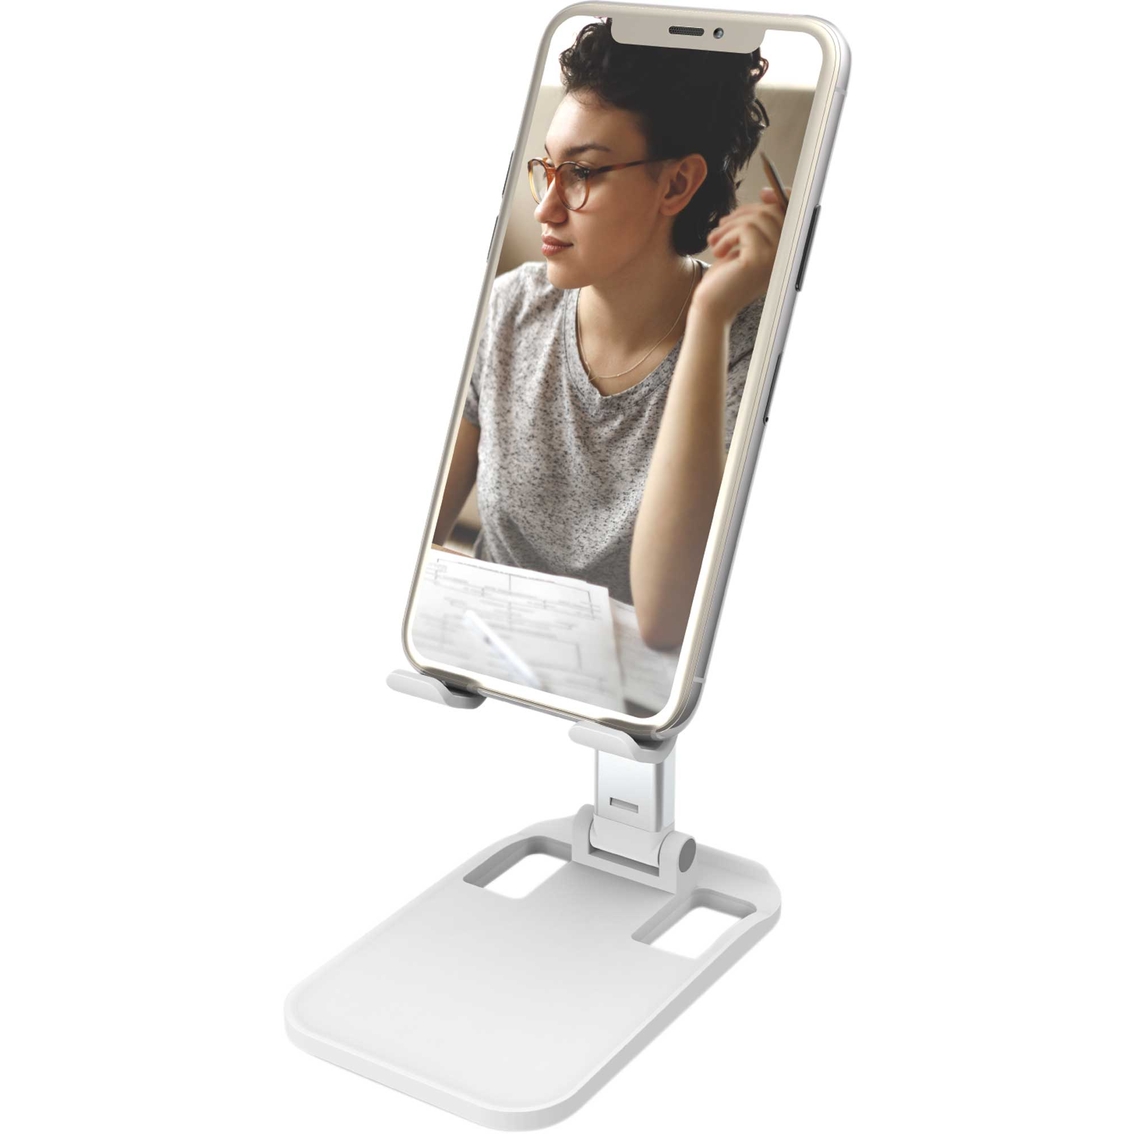 Digipower Multi-function Stand with Smartphone, Camera, Light & Microphone Mount